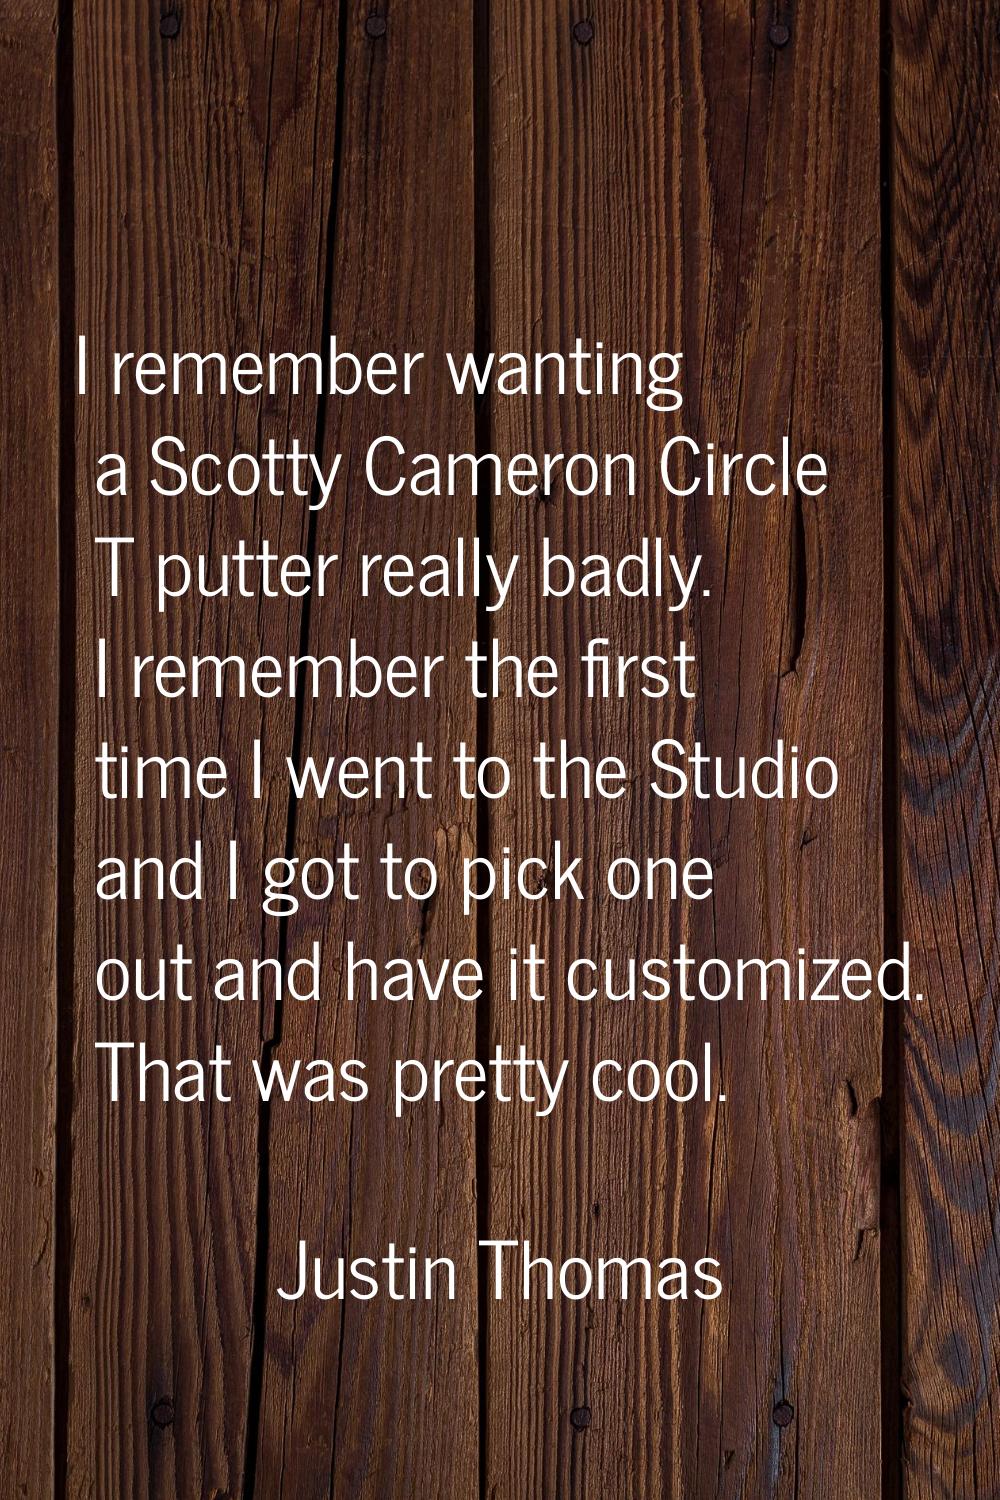 I remember wanting a Scotty Cameron Circle T putter really badly. I remember the first time I went 